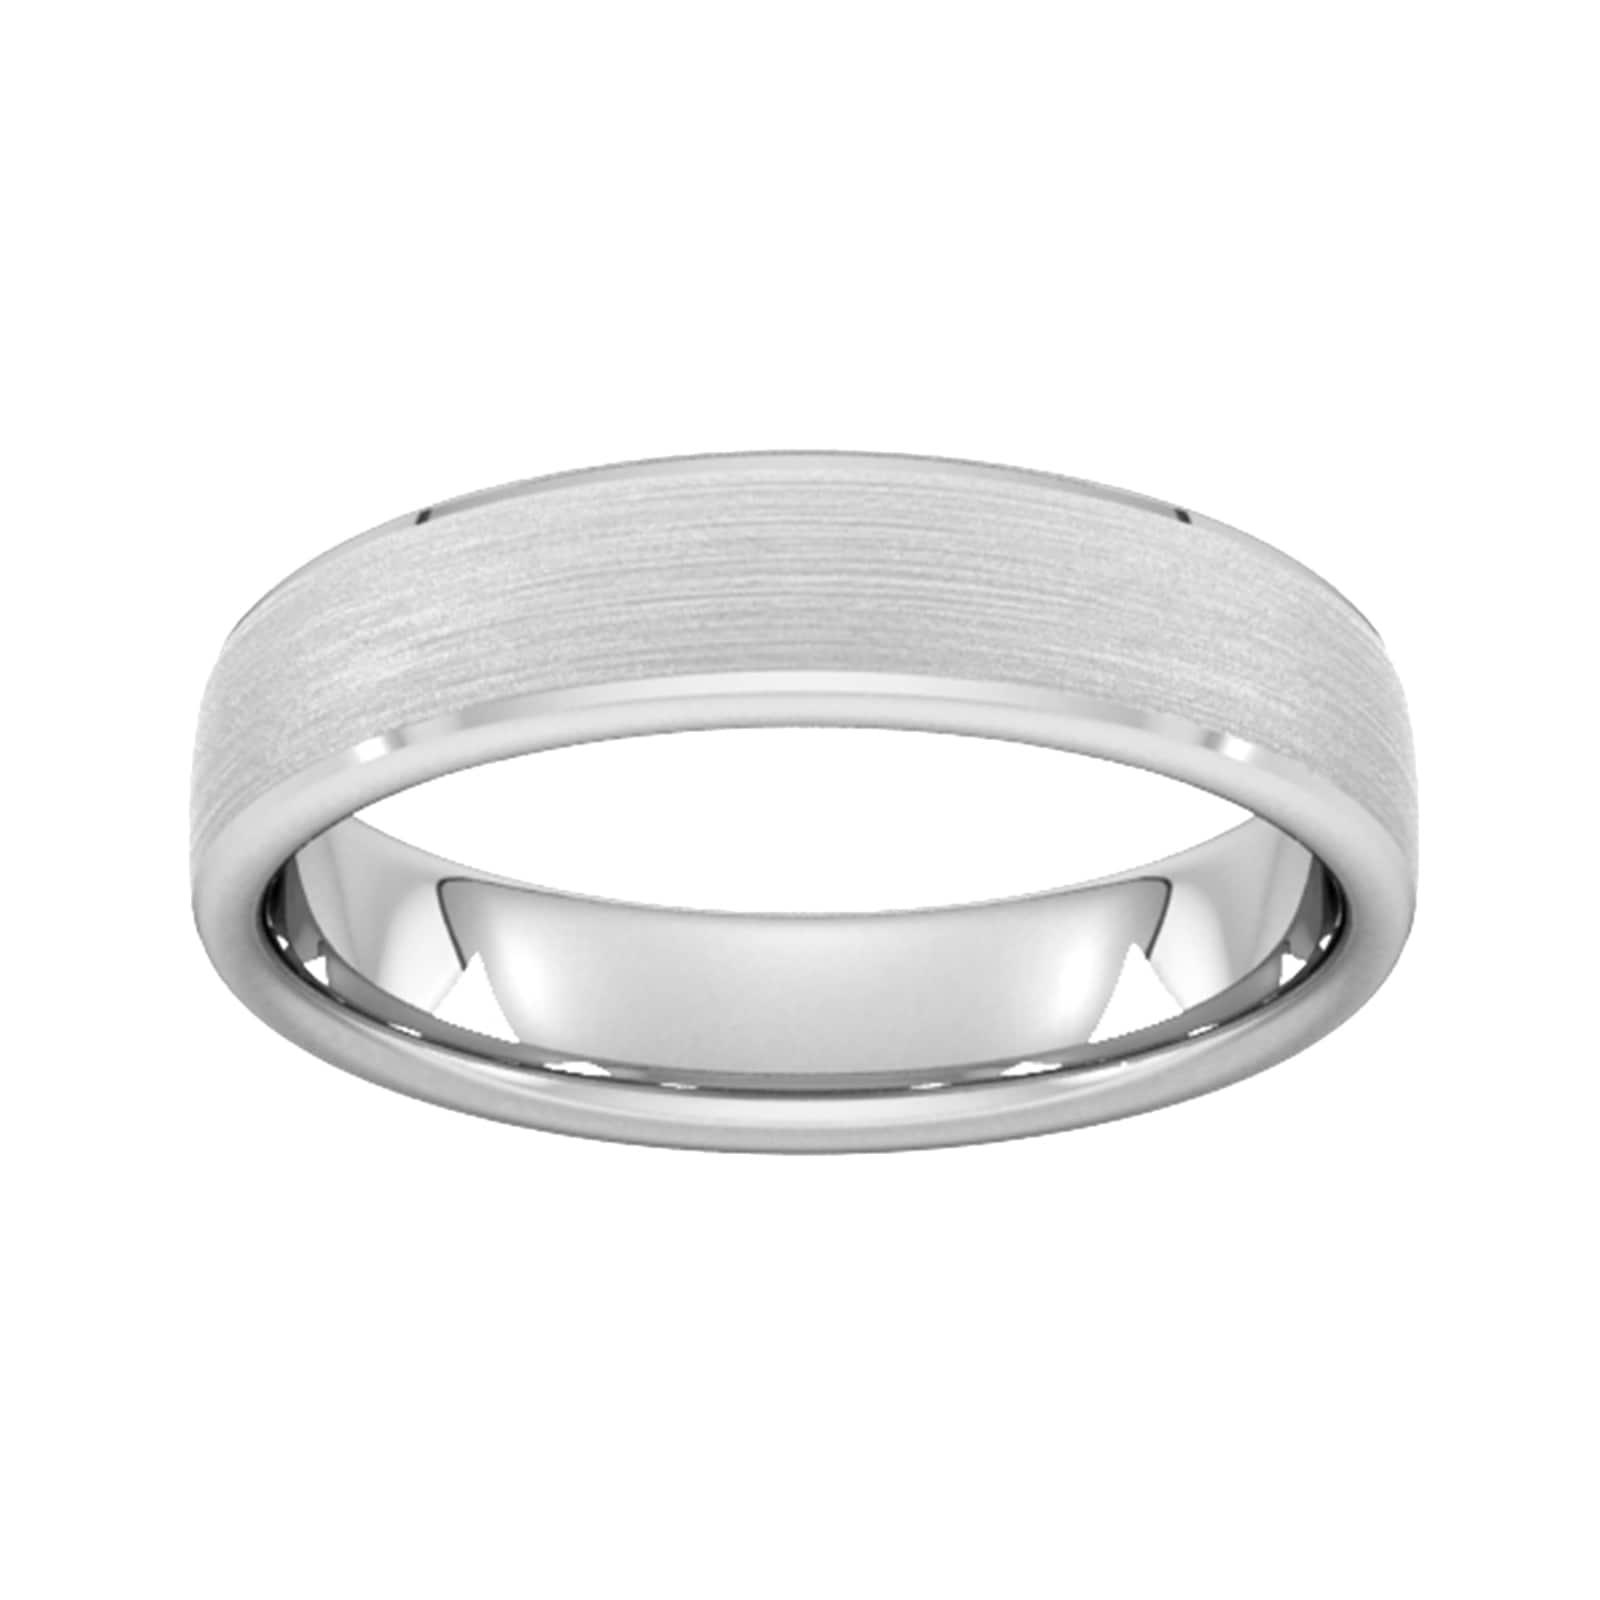 5mm Slight Court Heavy Polished Chamfered Edges With Matt Centre Wedding Ring In 9 Carat White Gold - Ring Size X